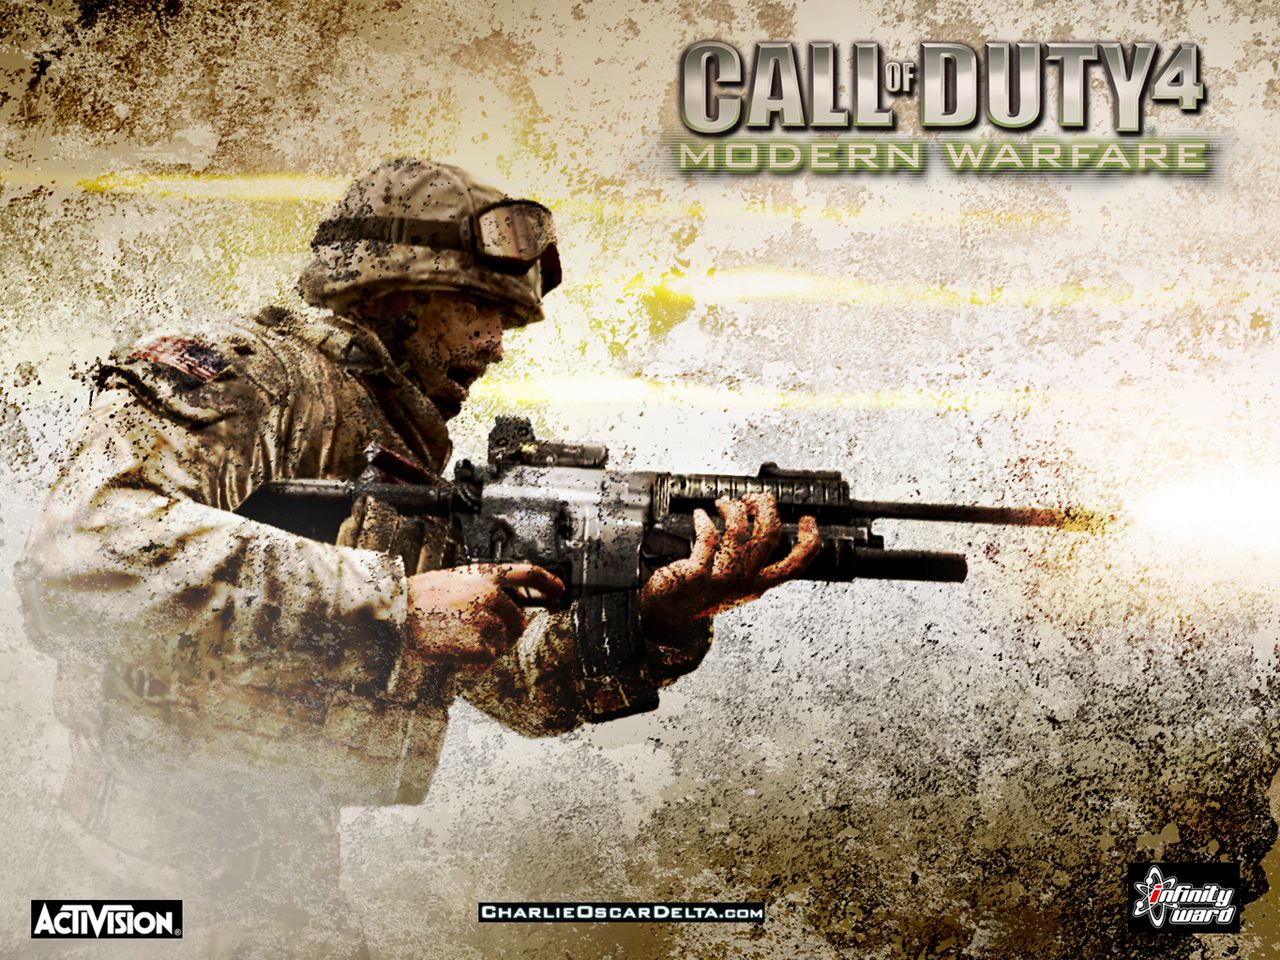 Call of Duty 4 Modern Warfare screenshots, images and pictures